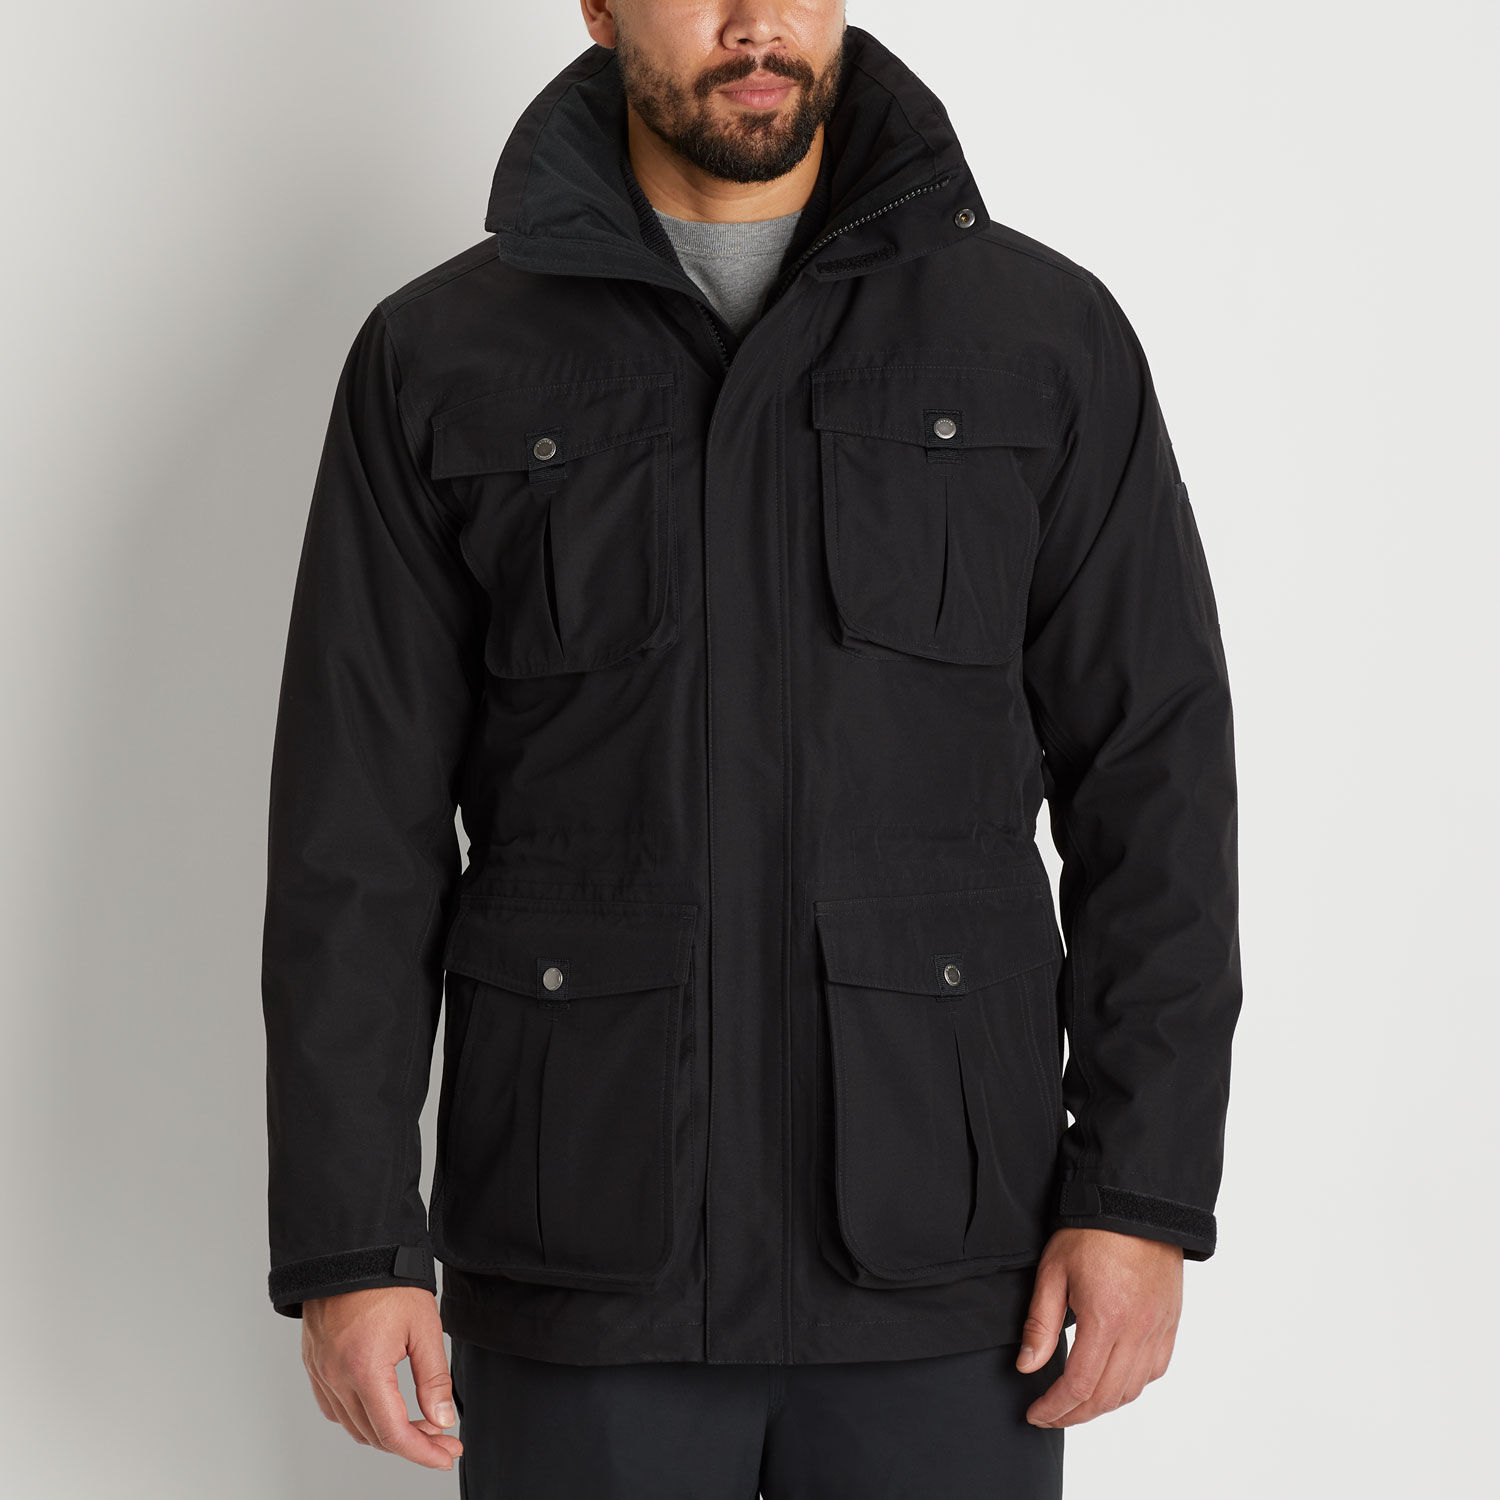 Men's Canadian Military 3-in-1 Parka | Duluth Trading Company